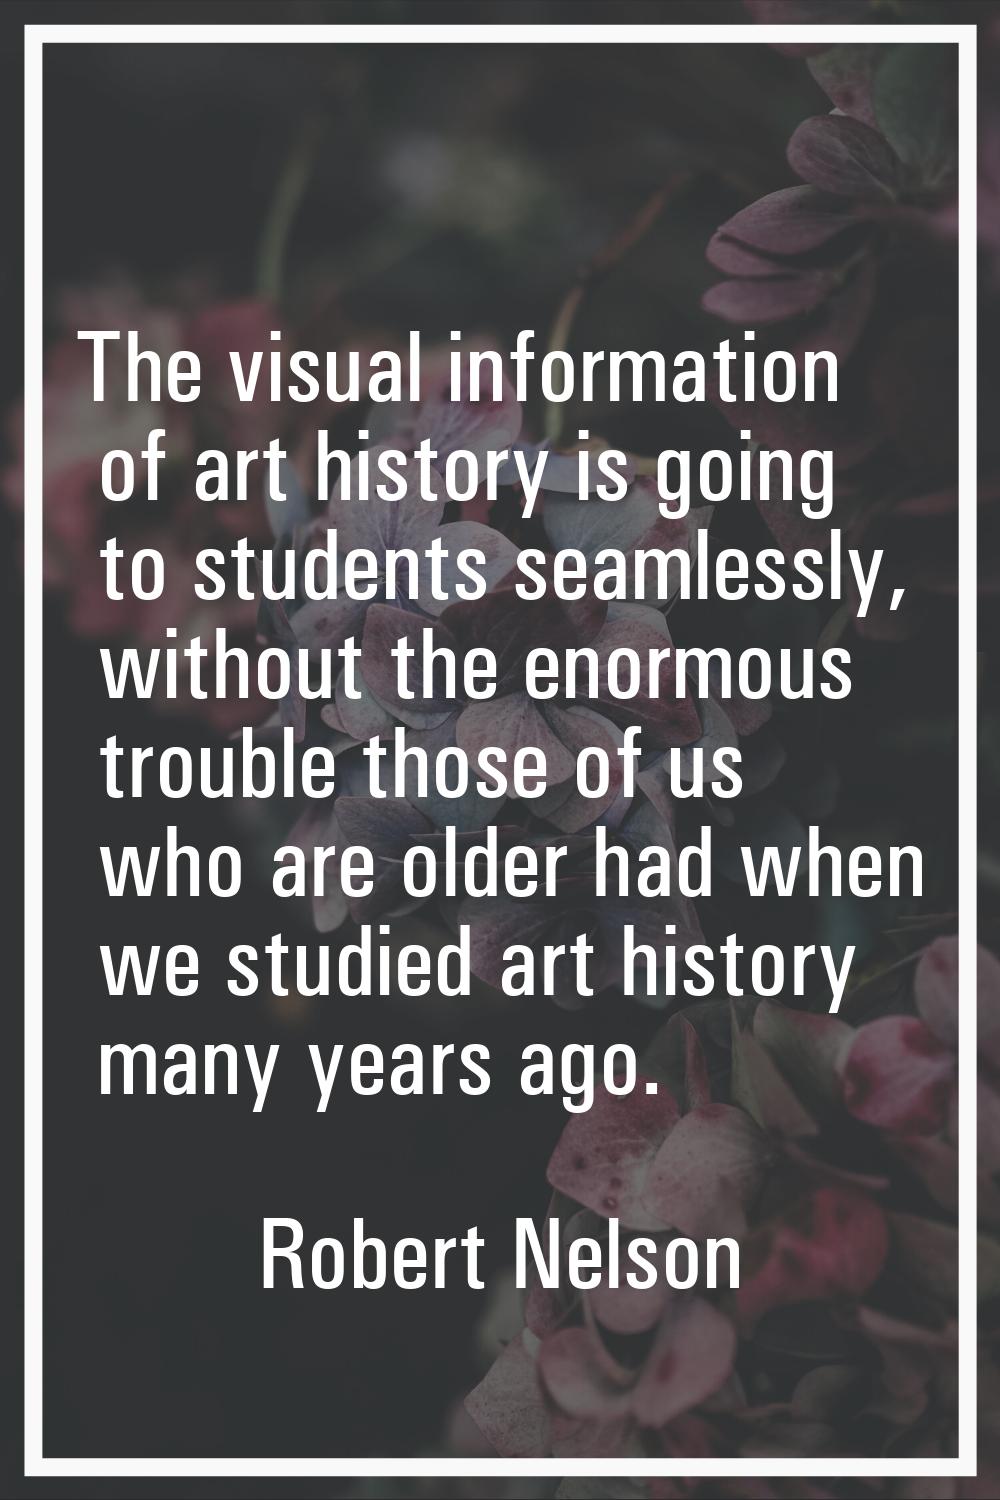 The visual information of art history is going to students seamlessly, without the enormous trouble